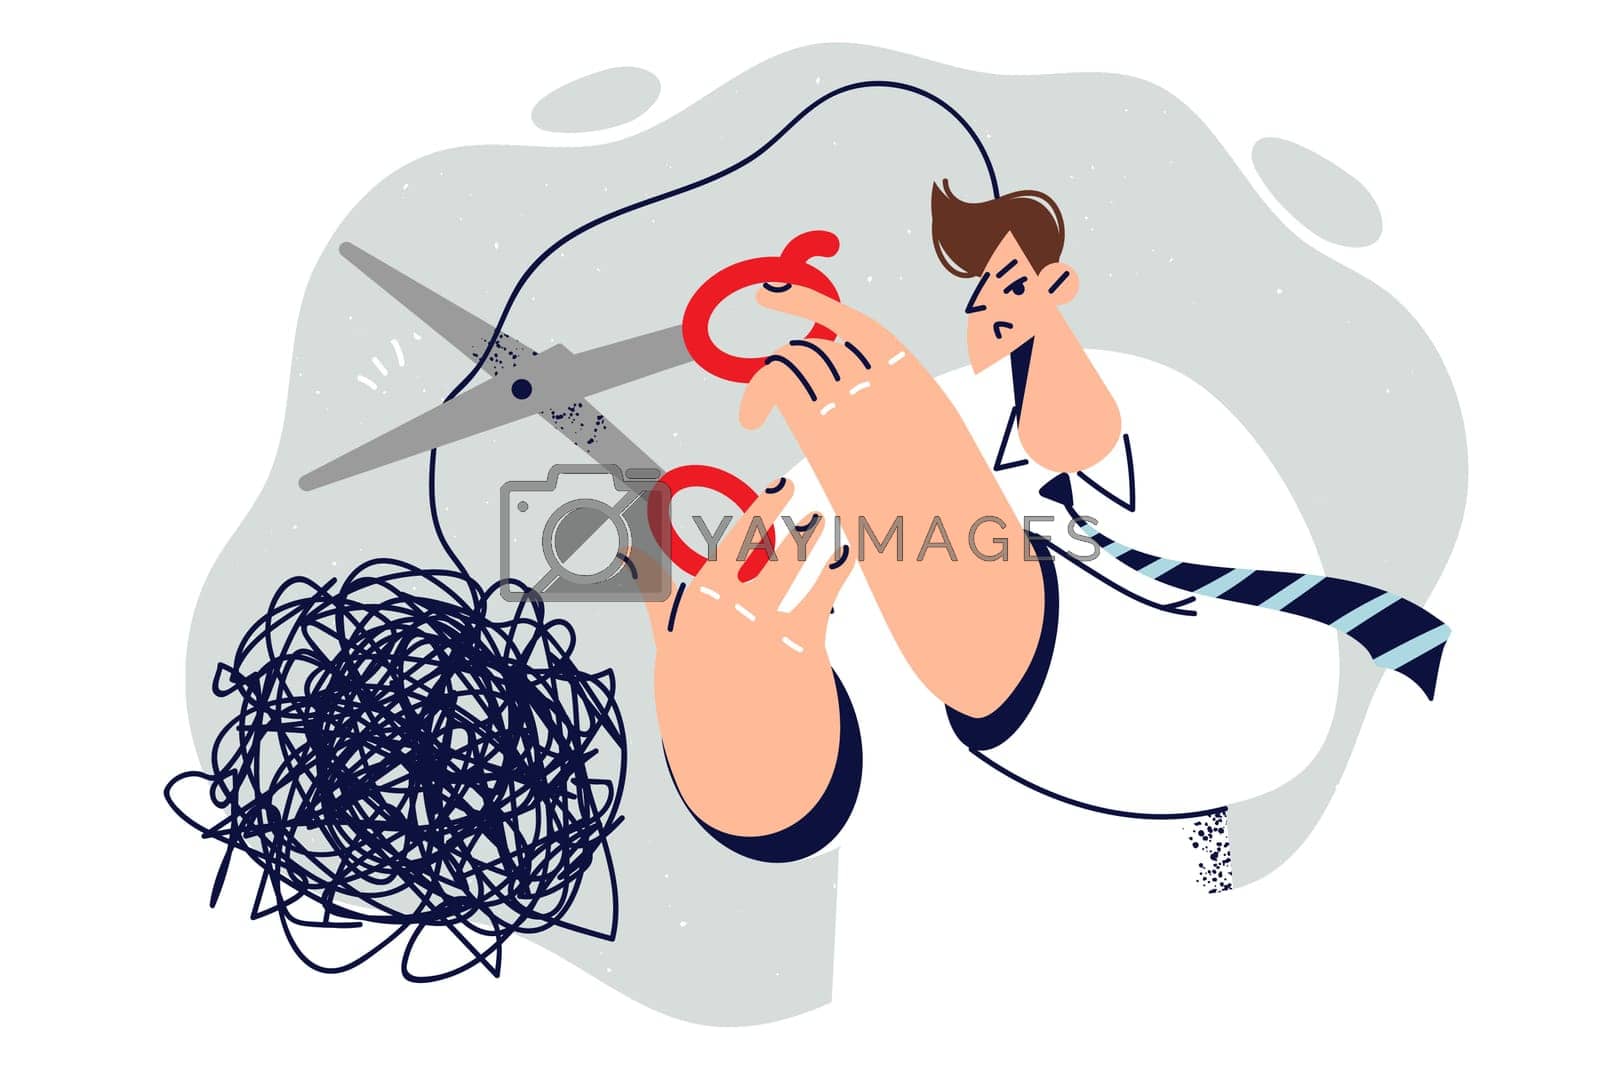 Royalty free image of Man with psychological problems cuts off tangled cord thought symbolizing stress due to toxic work by Vasilyeu